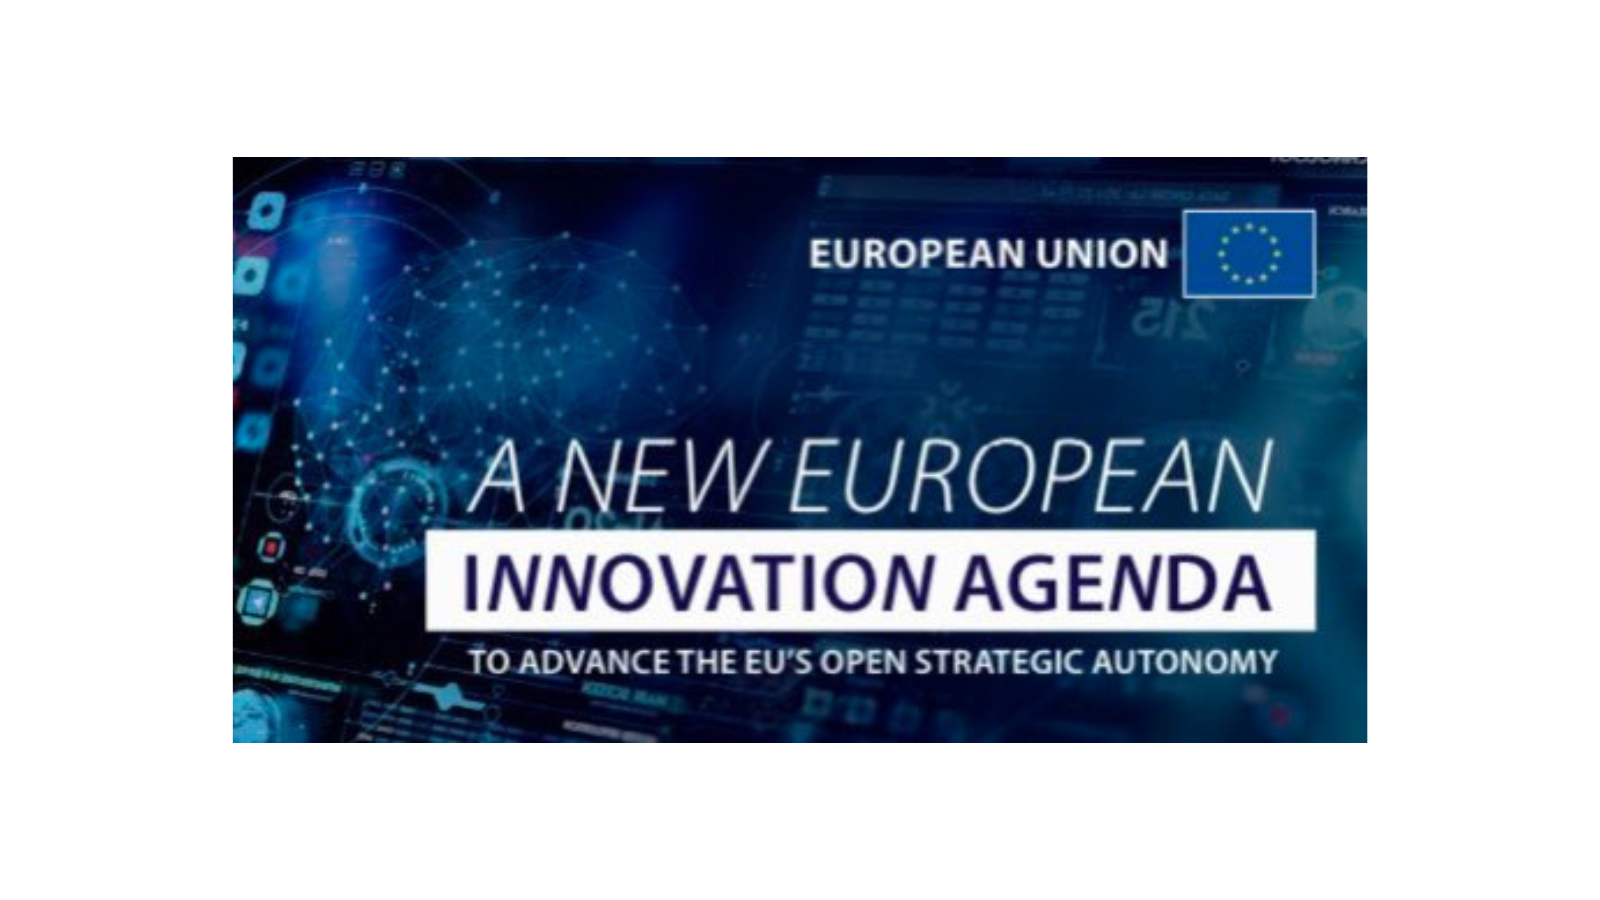 New European Innovation Agenda: Council conclusions adopted